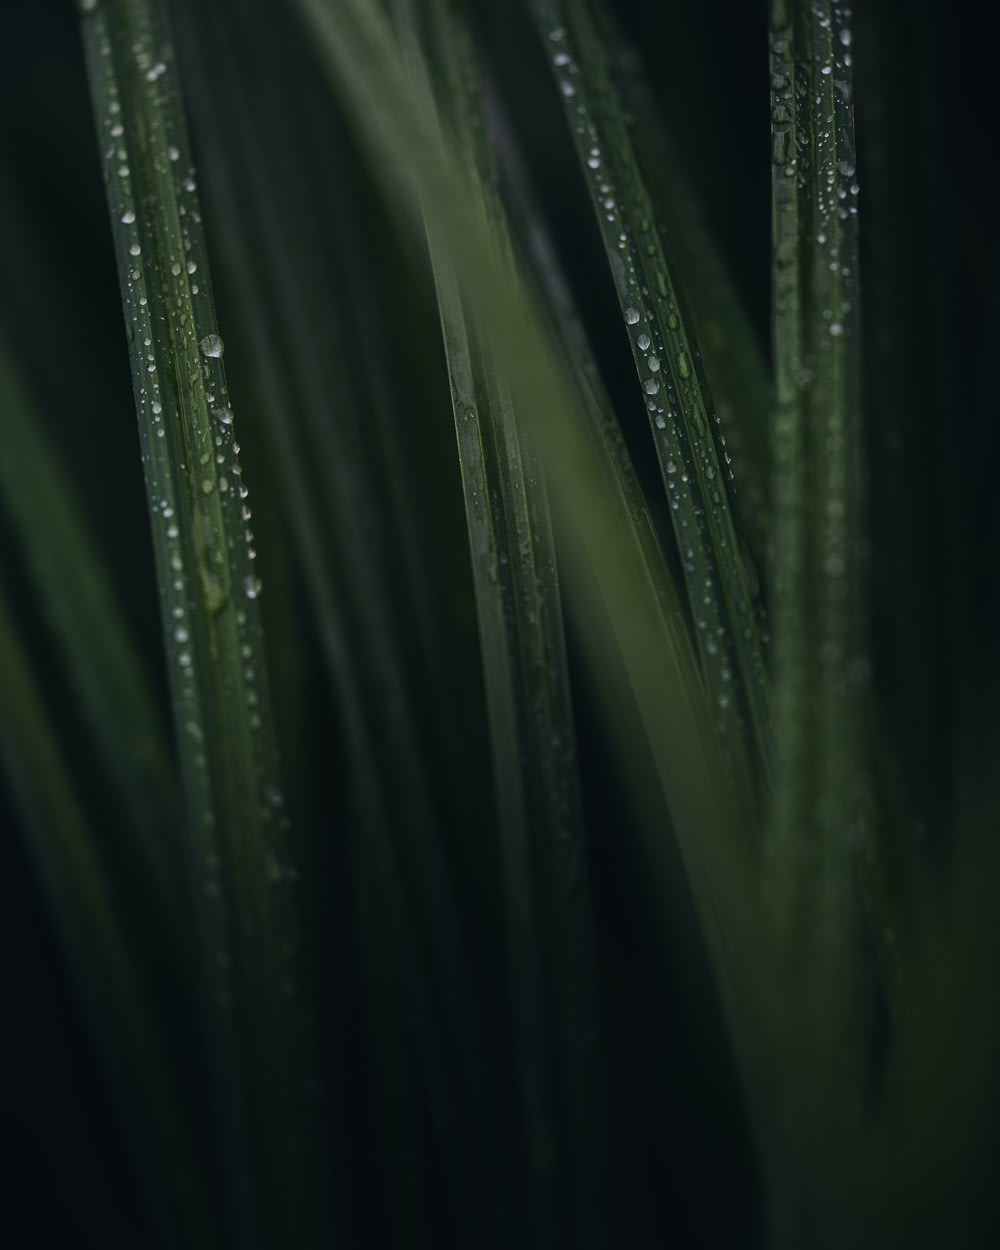 a close up of a green plant with drops of water on it